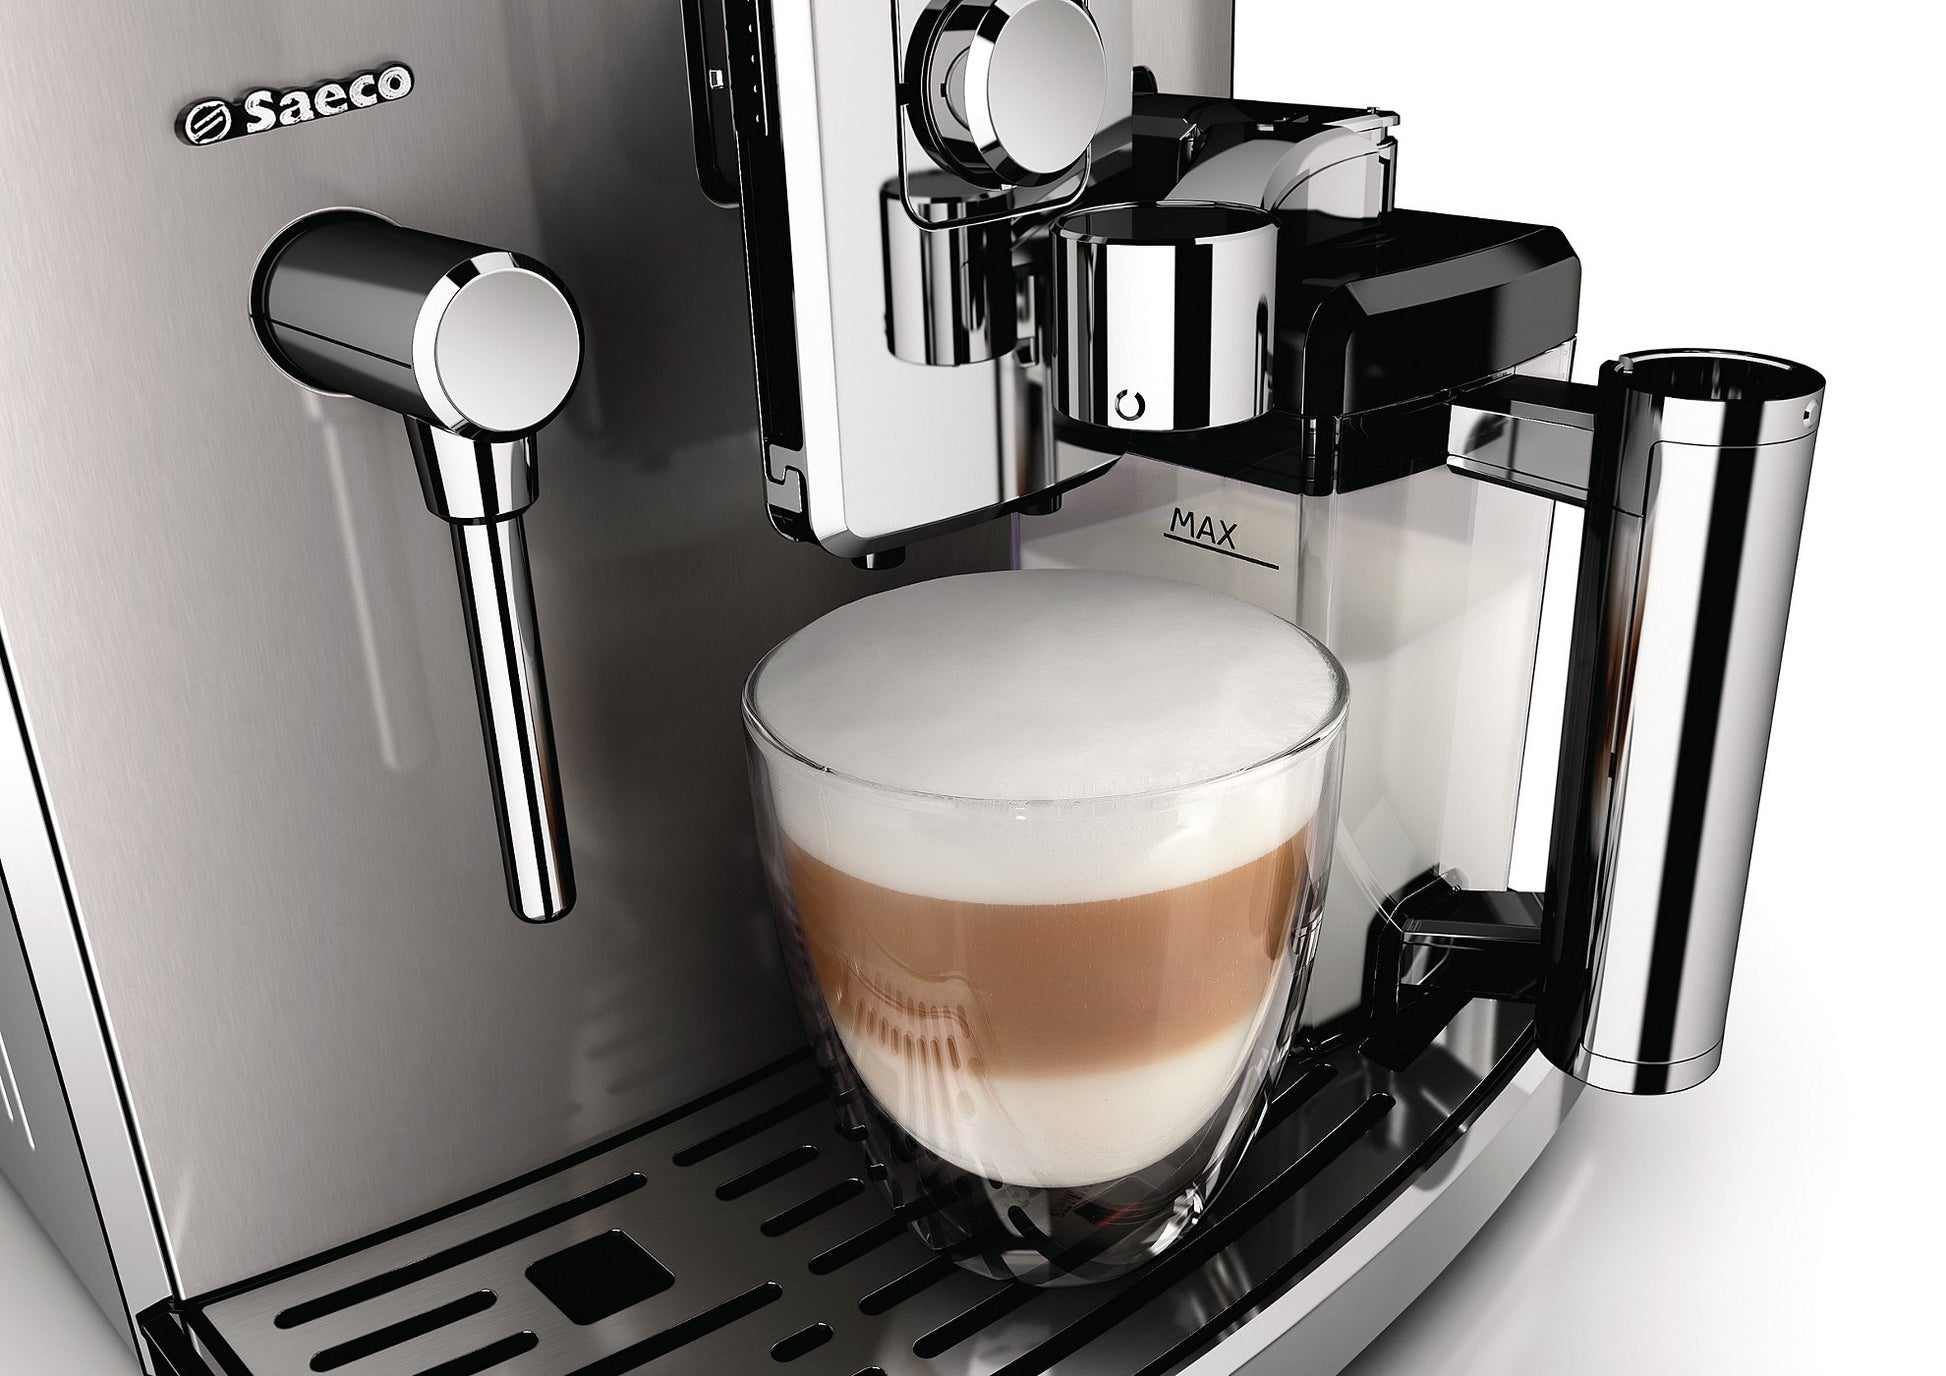 Keurig Cafe One-Touch Milk Frother – Whole Latte Love